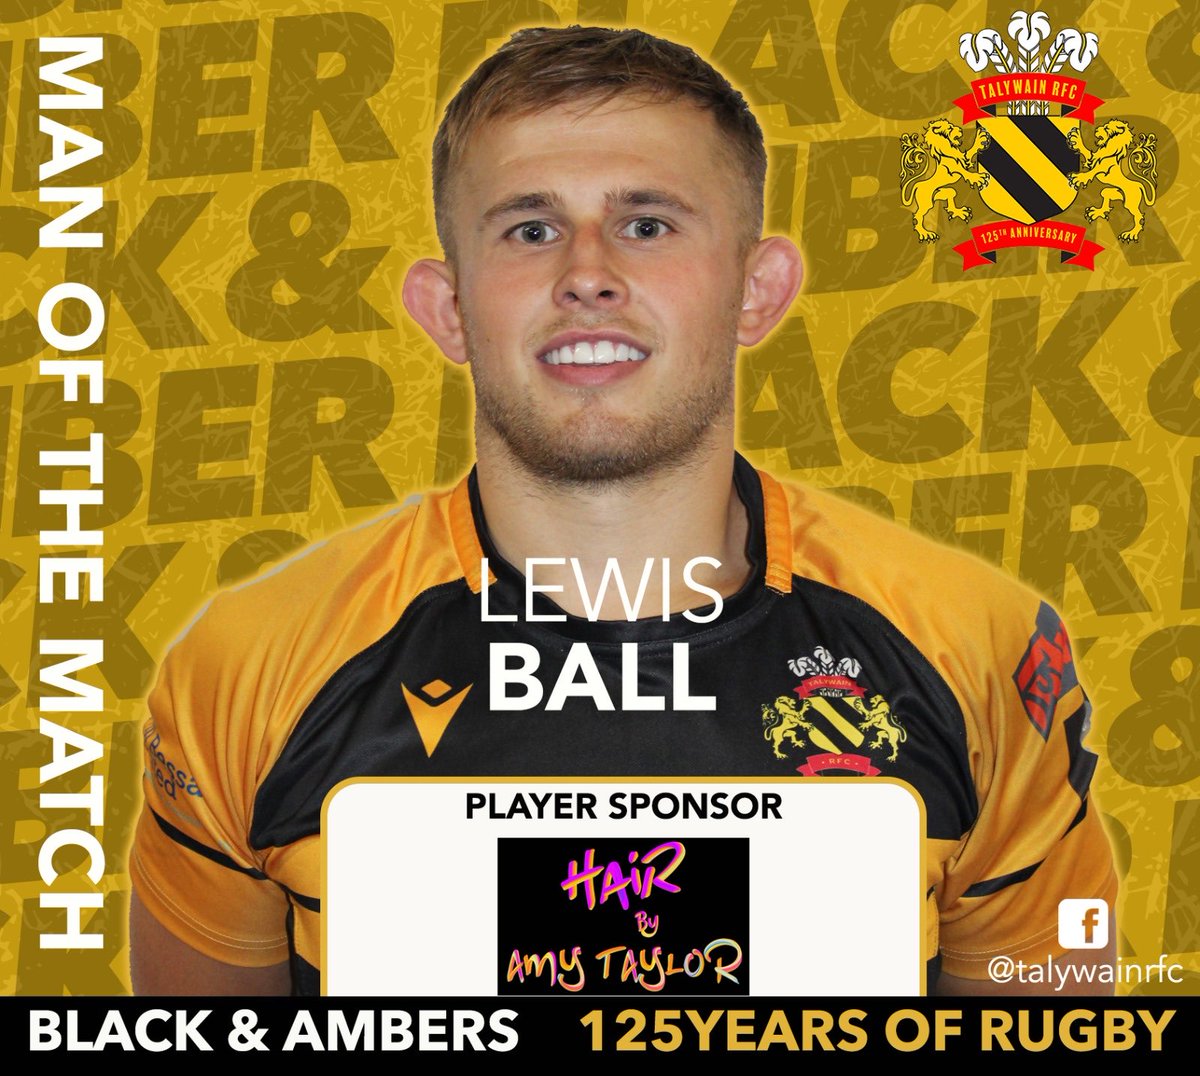 This guy could pick up this award week in week out, he always gives everything and today he absolutely emptied the tank. This weeks MOTM goes to our skipper Lewis Ball, well done Lew. 🖤💛🖤💛